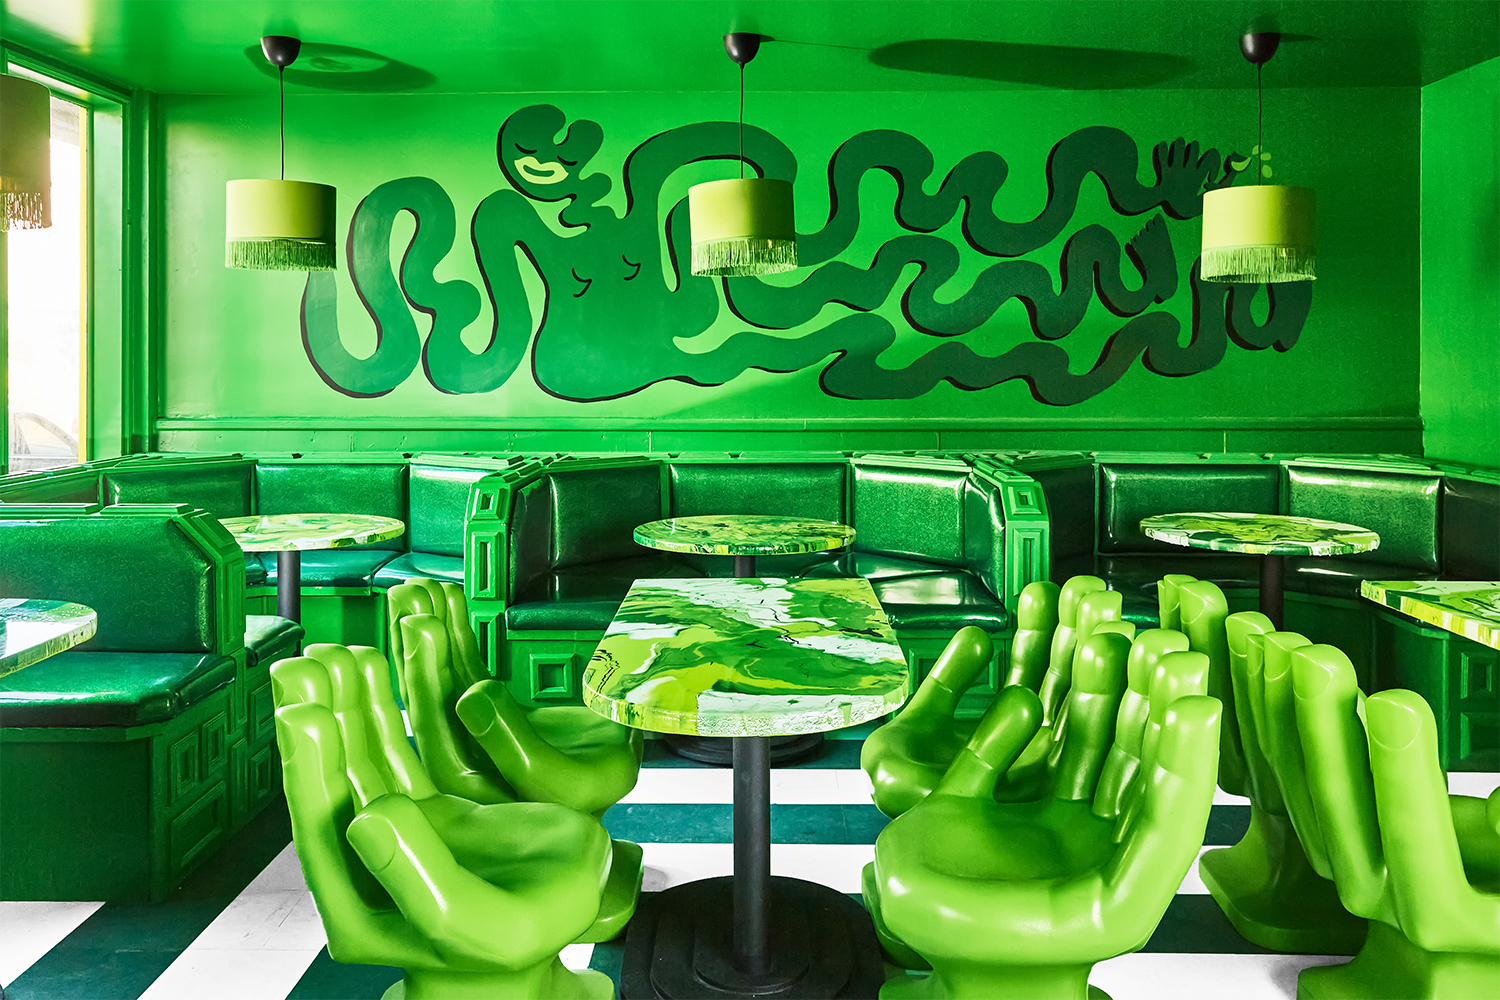 The green dining room with hand-shaped chairs at Shuggie's, a food waste restaurant in San Francisco